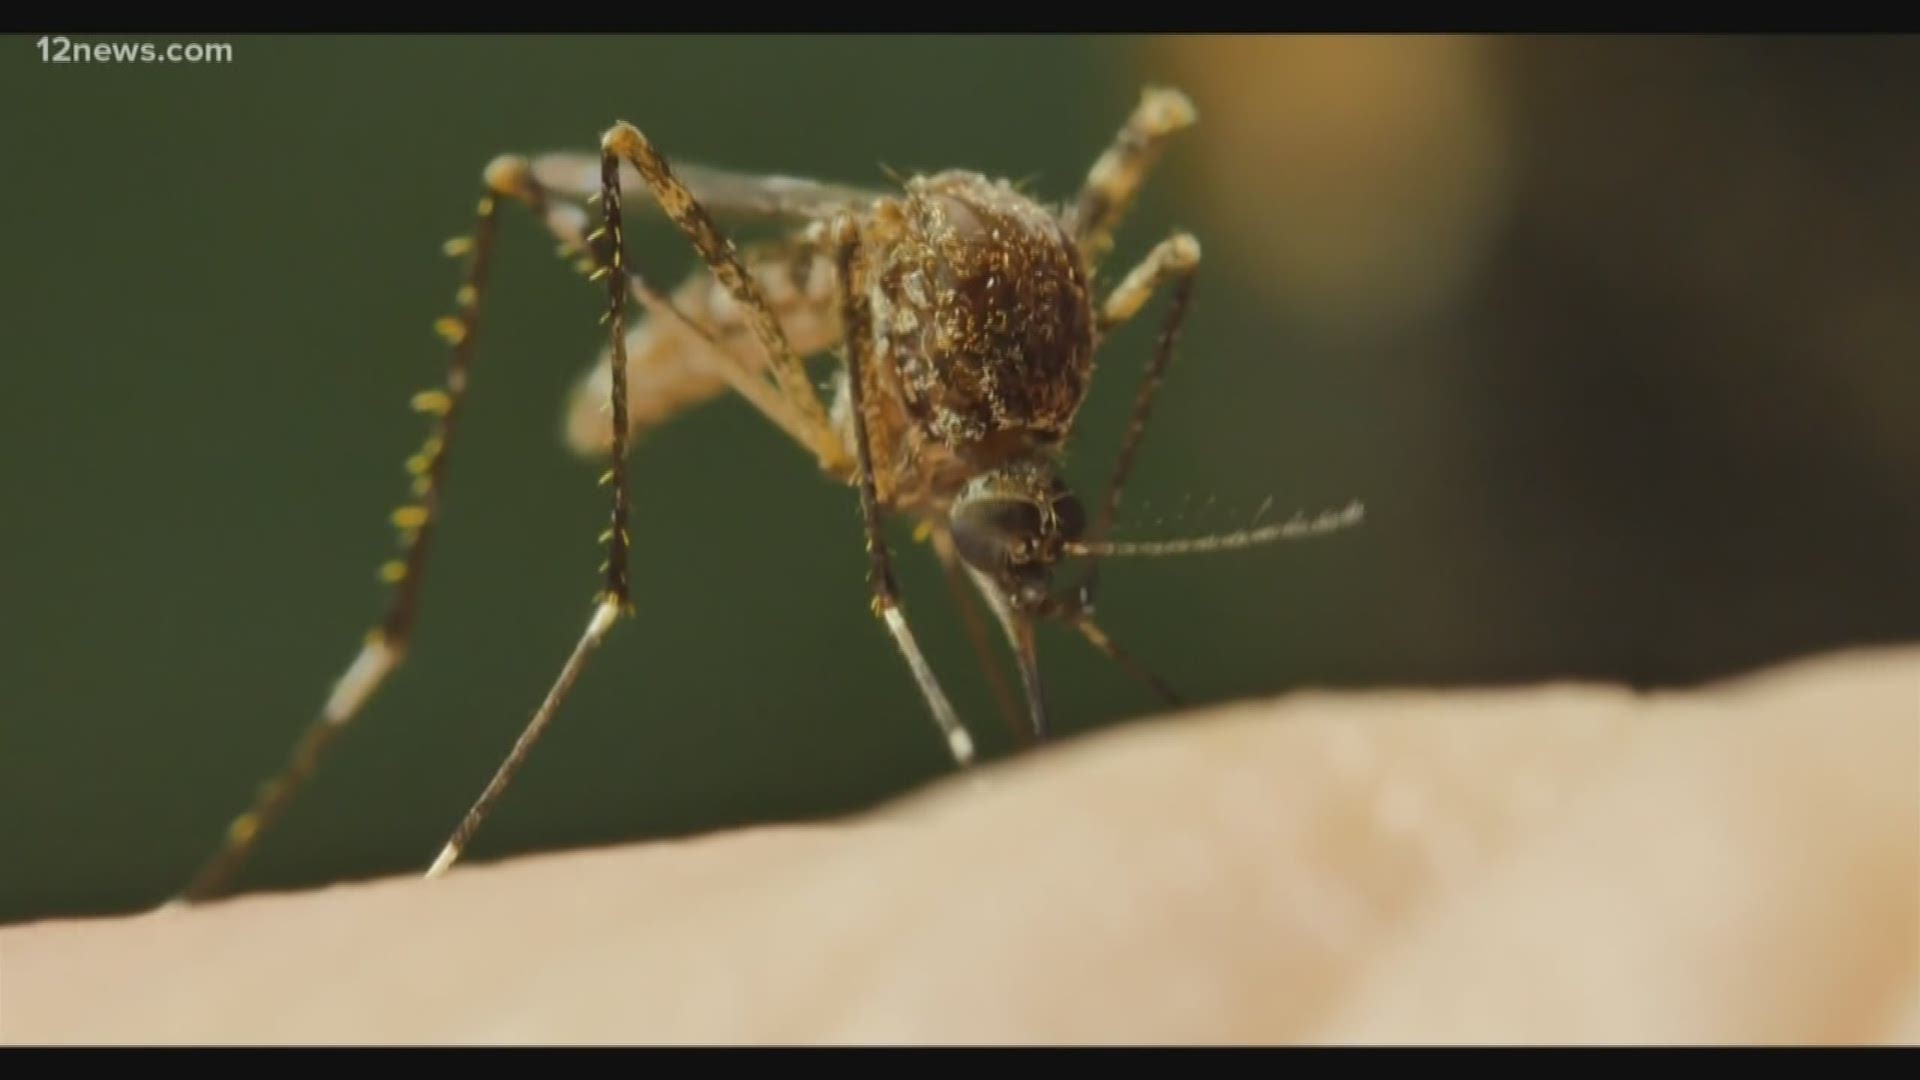 Researchers at the University of Arizona say they are just a few years away from genetically altering mosquitoes to cut out their breeding potential. The researchers say it will only affect mosquitoes and no other insects.